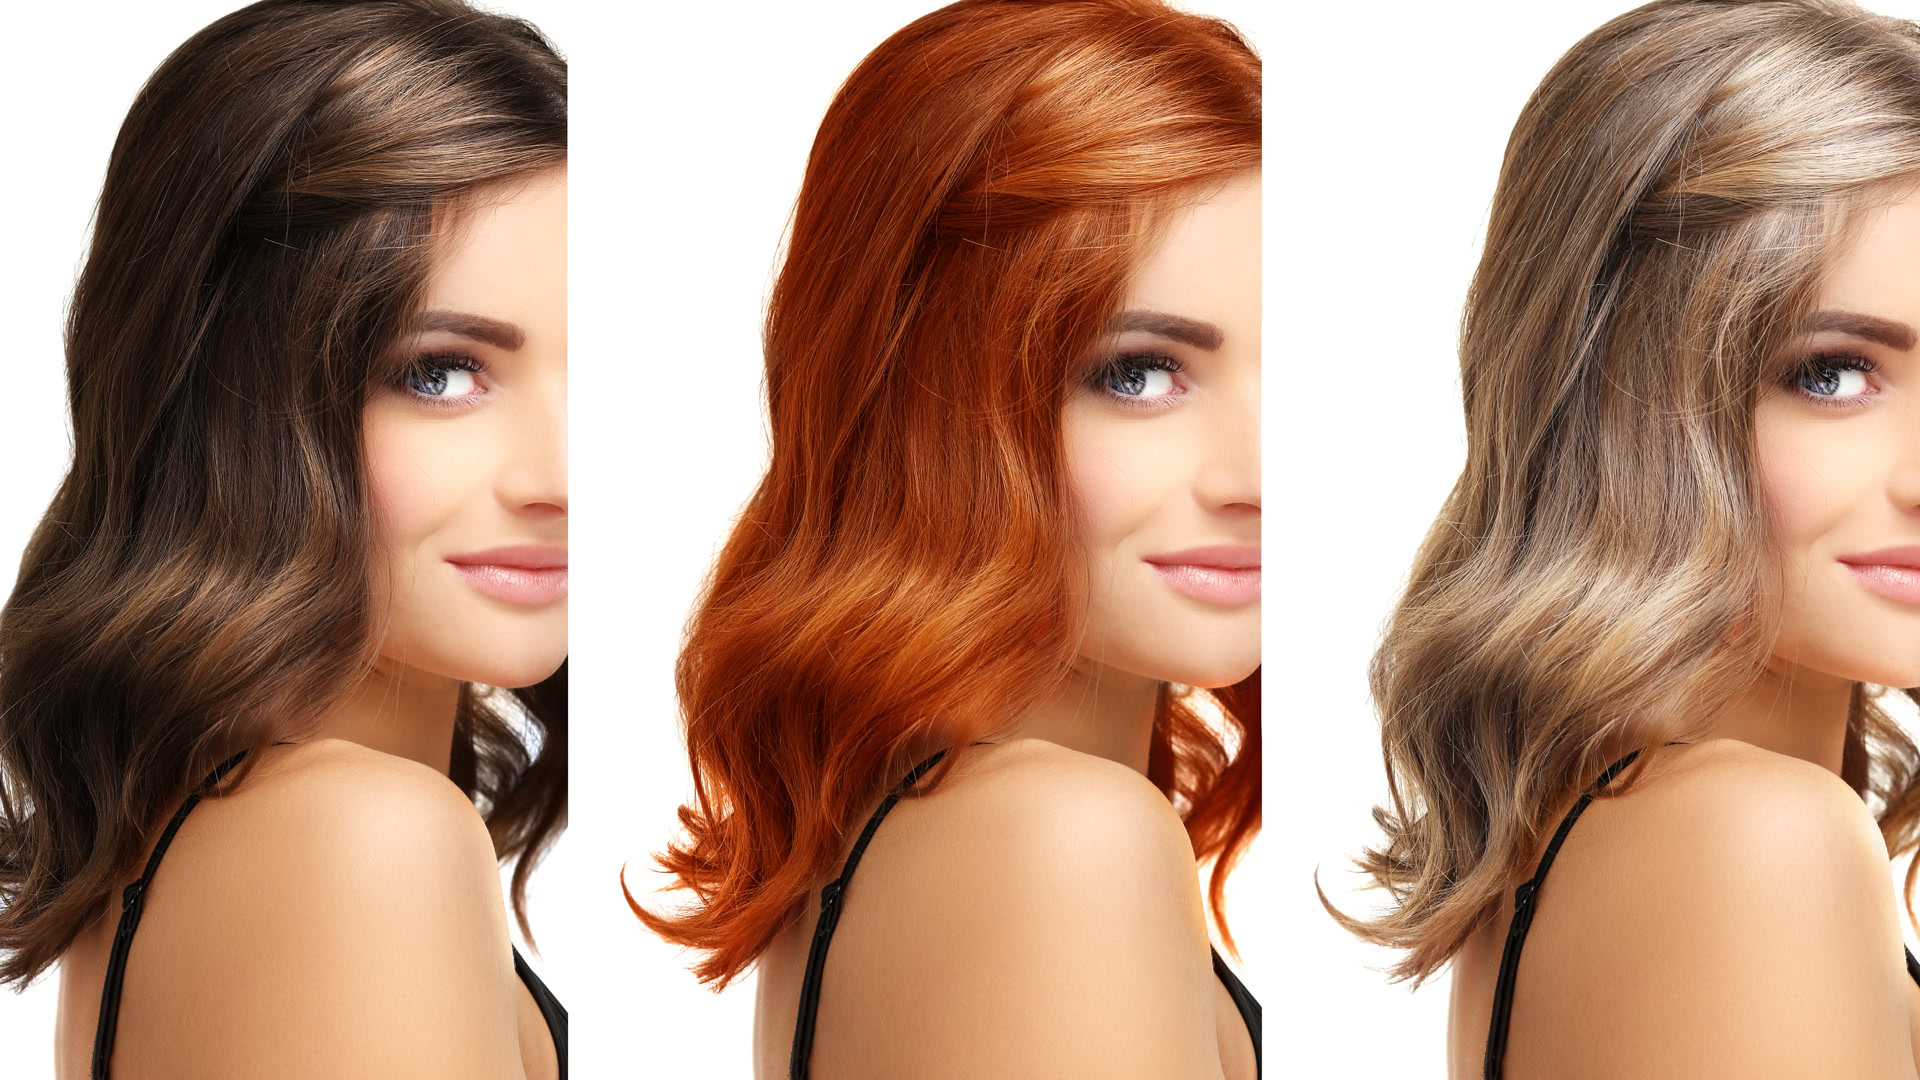 Blonde and Brown Hair: The Best Hair Color for Your Skin Tone - wide 5